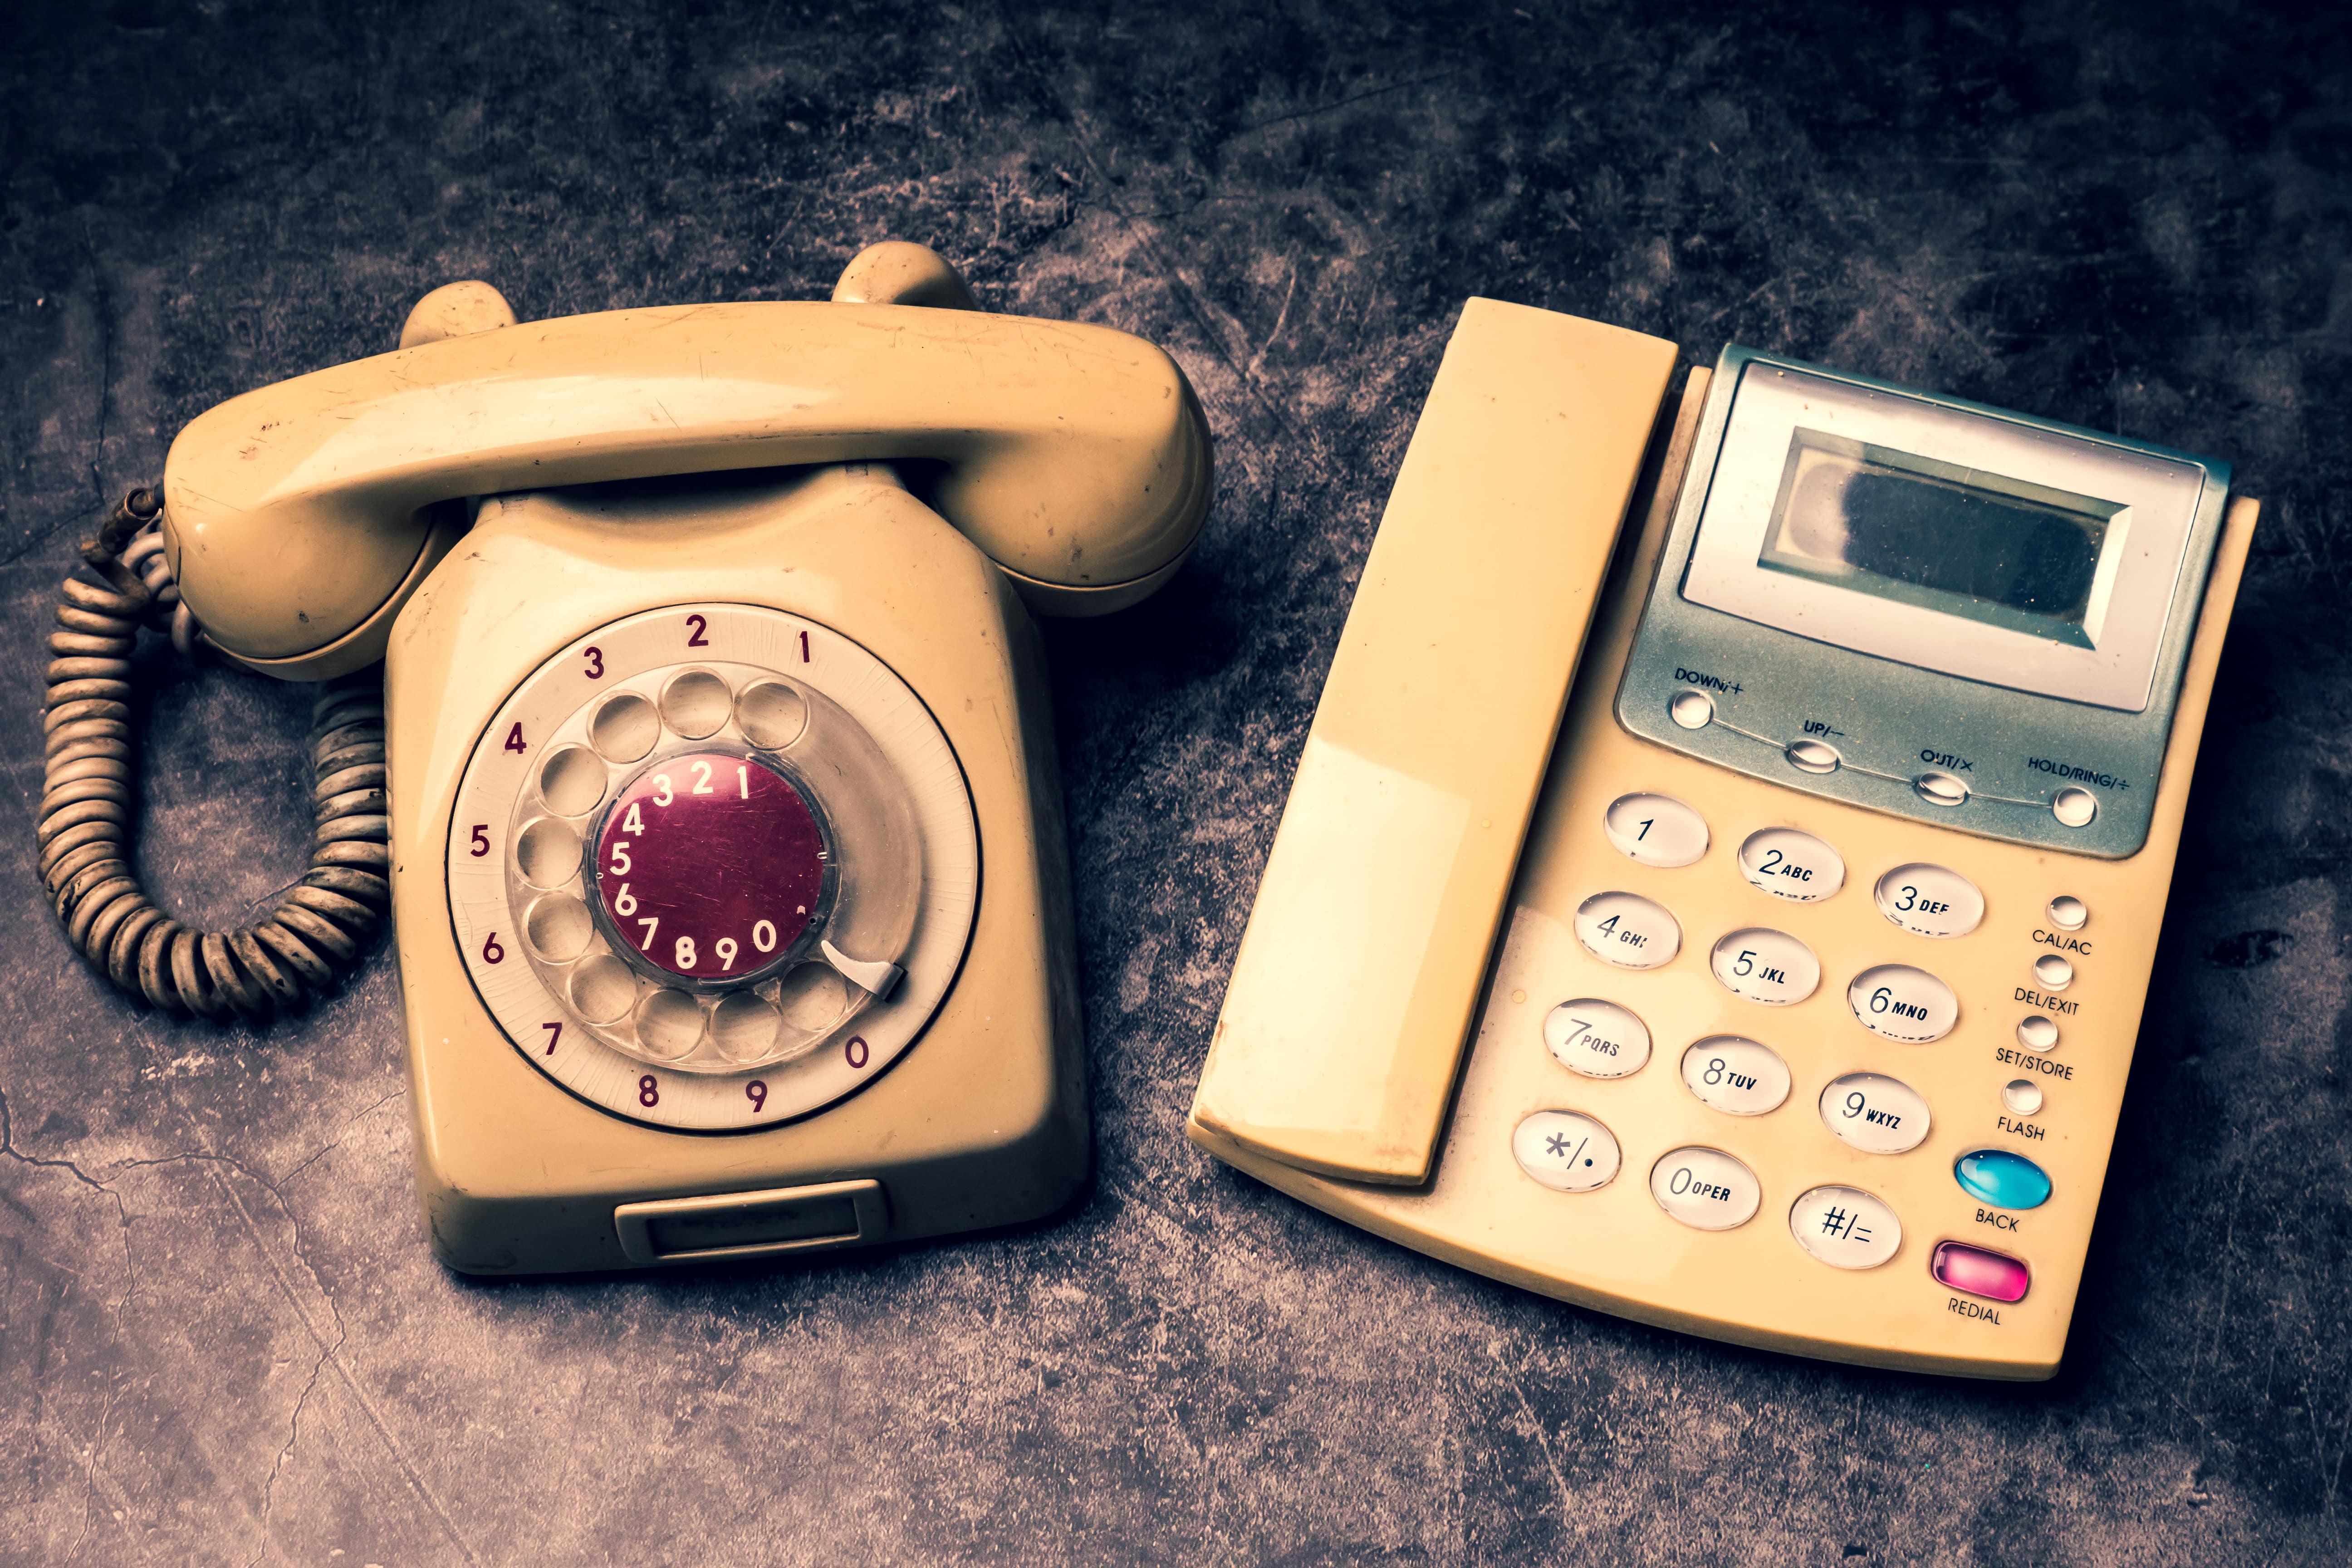 IVR does not have to be stuck in the old ages